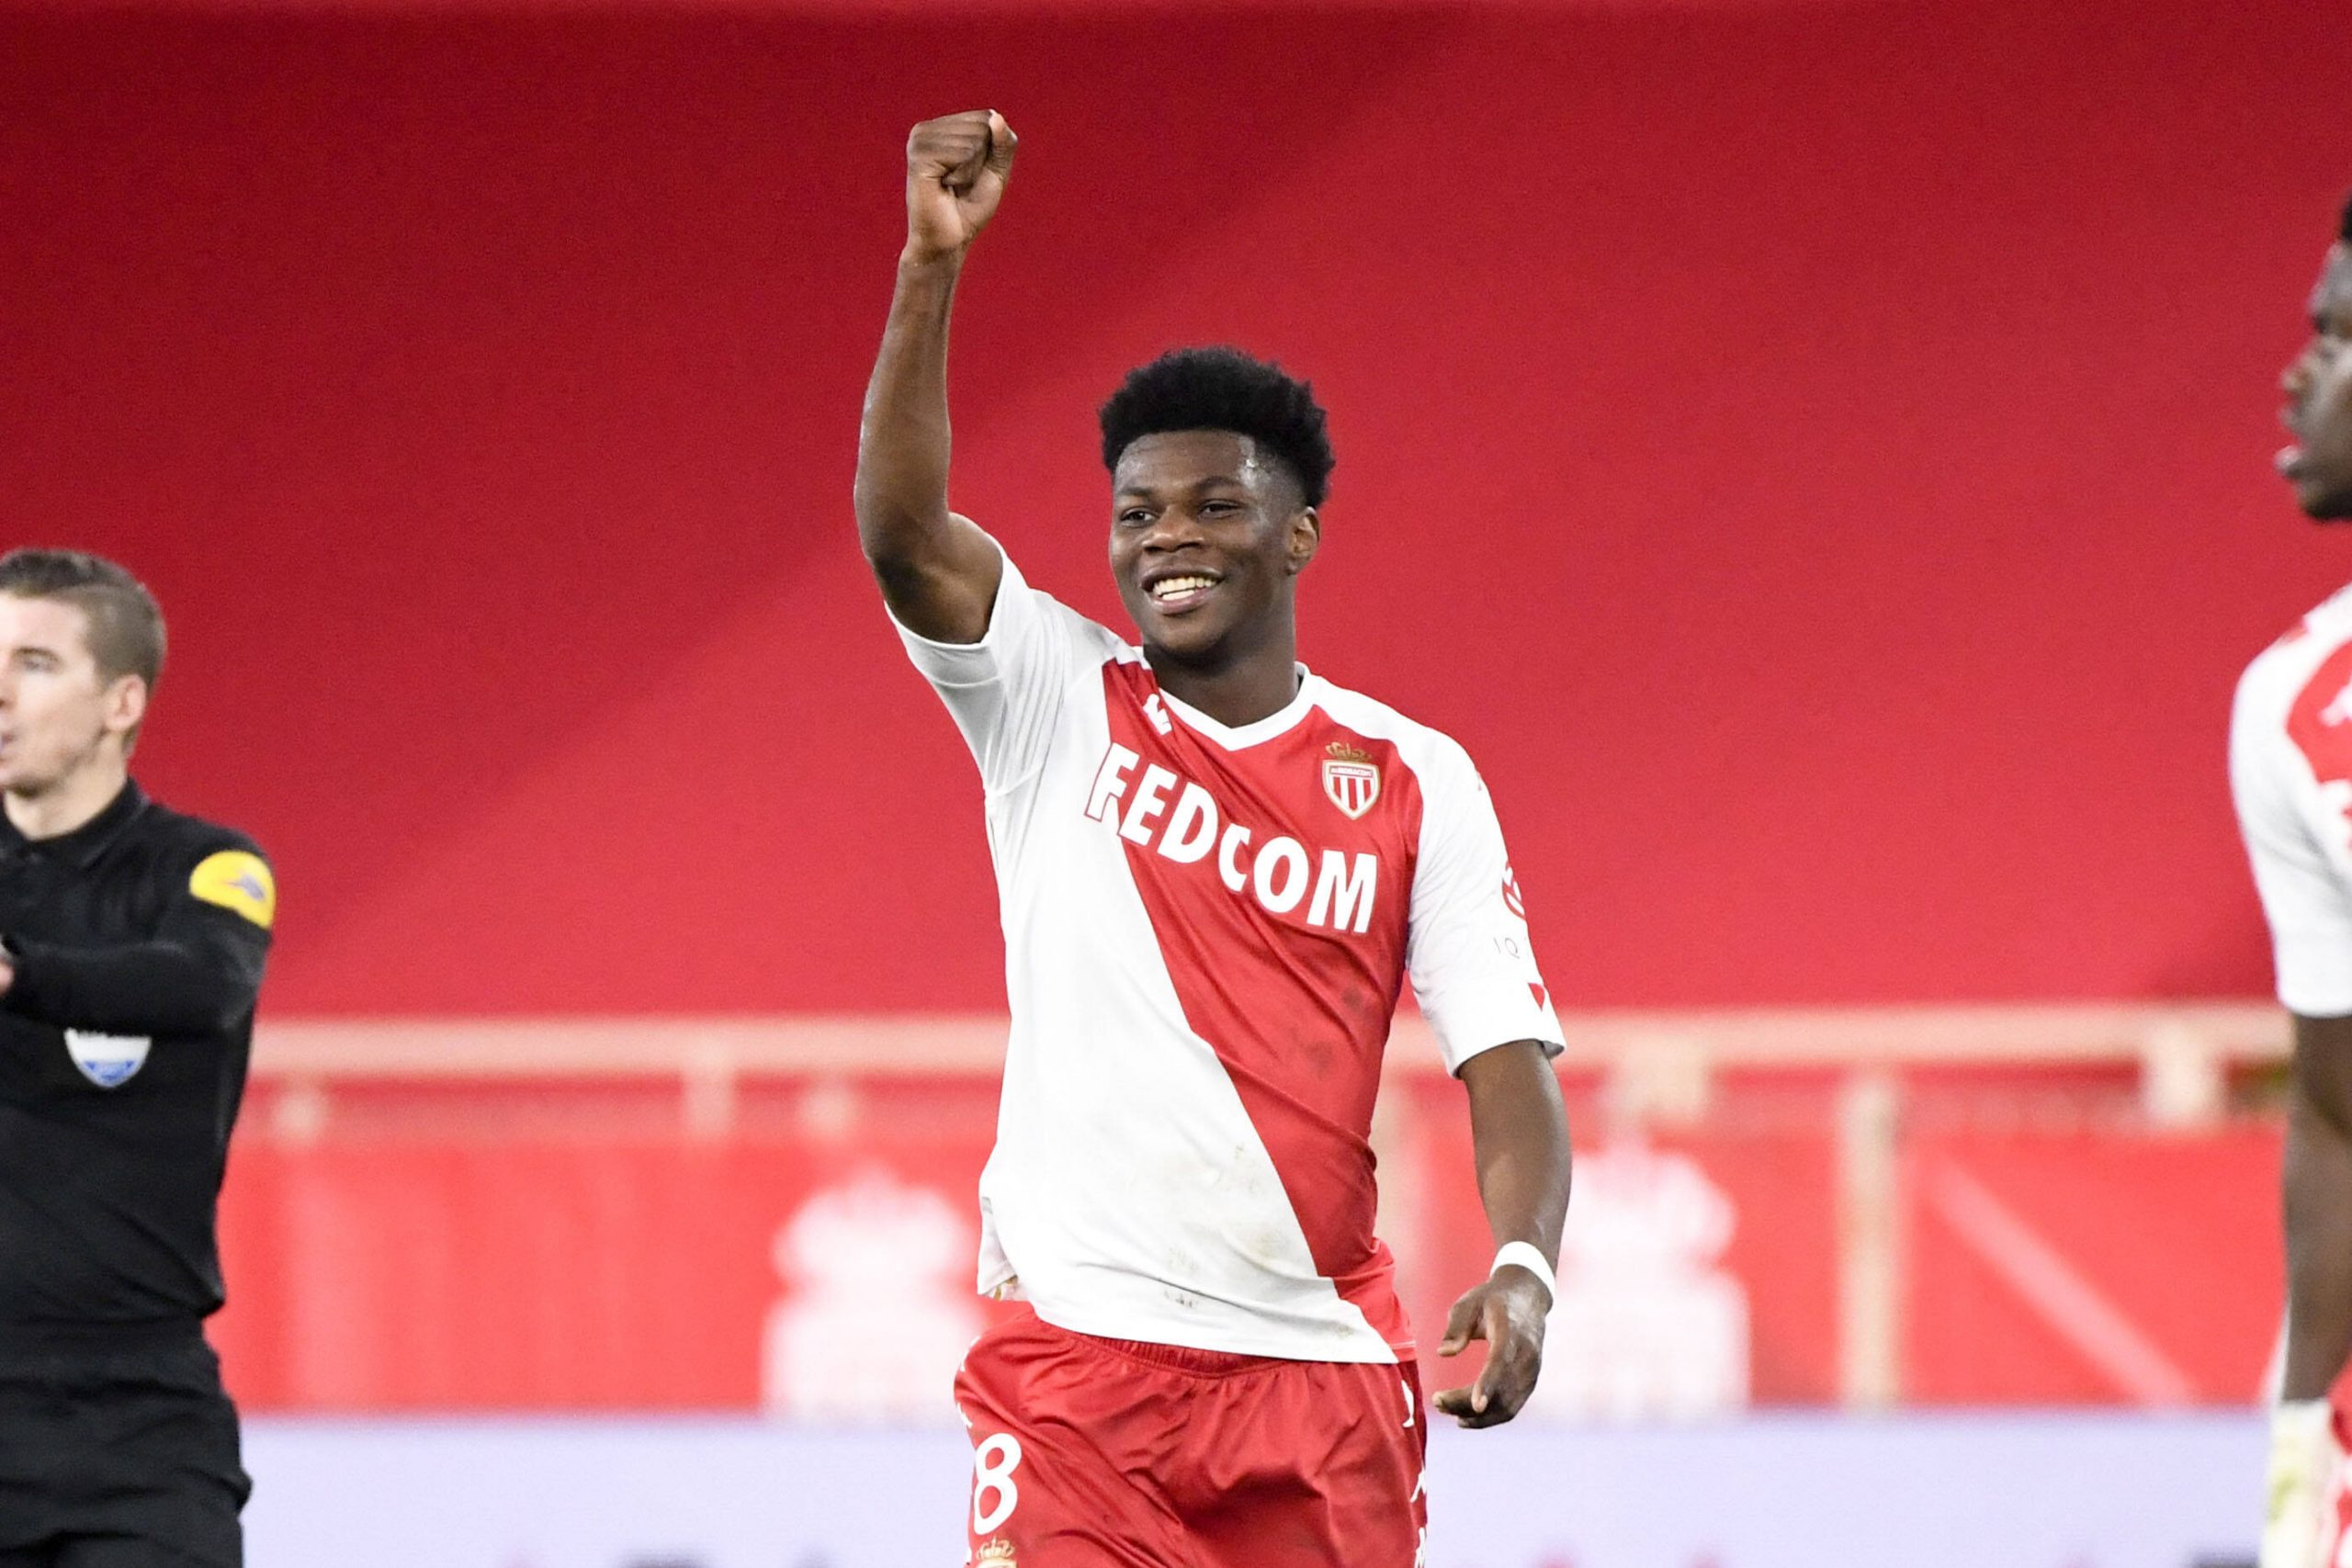 Chelsea in contention to sign Aurelien Tchouameni in recent weeks due to the sanctions.